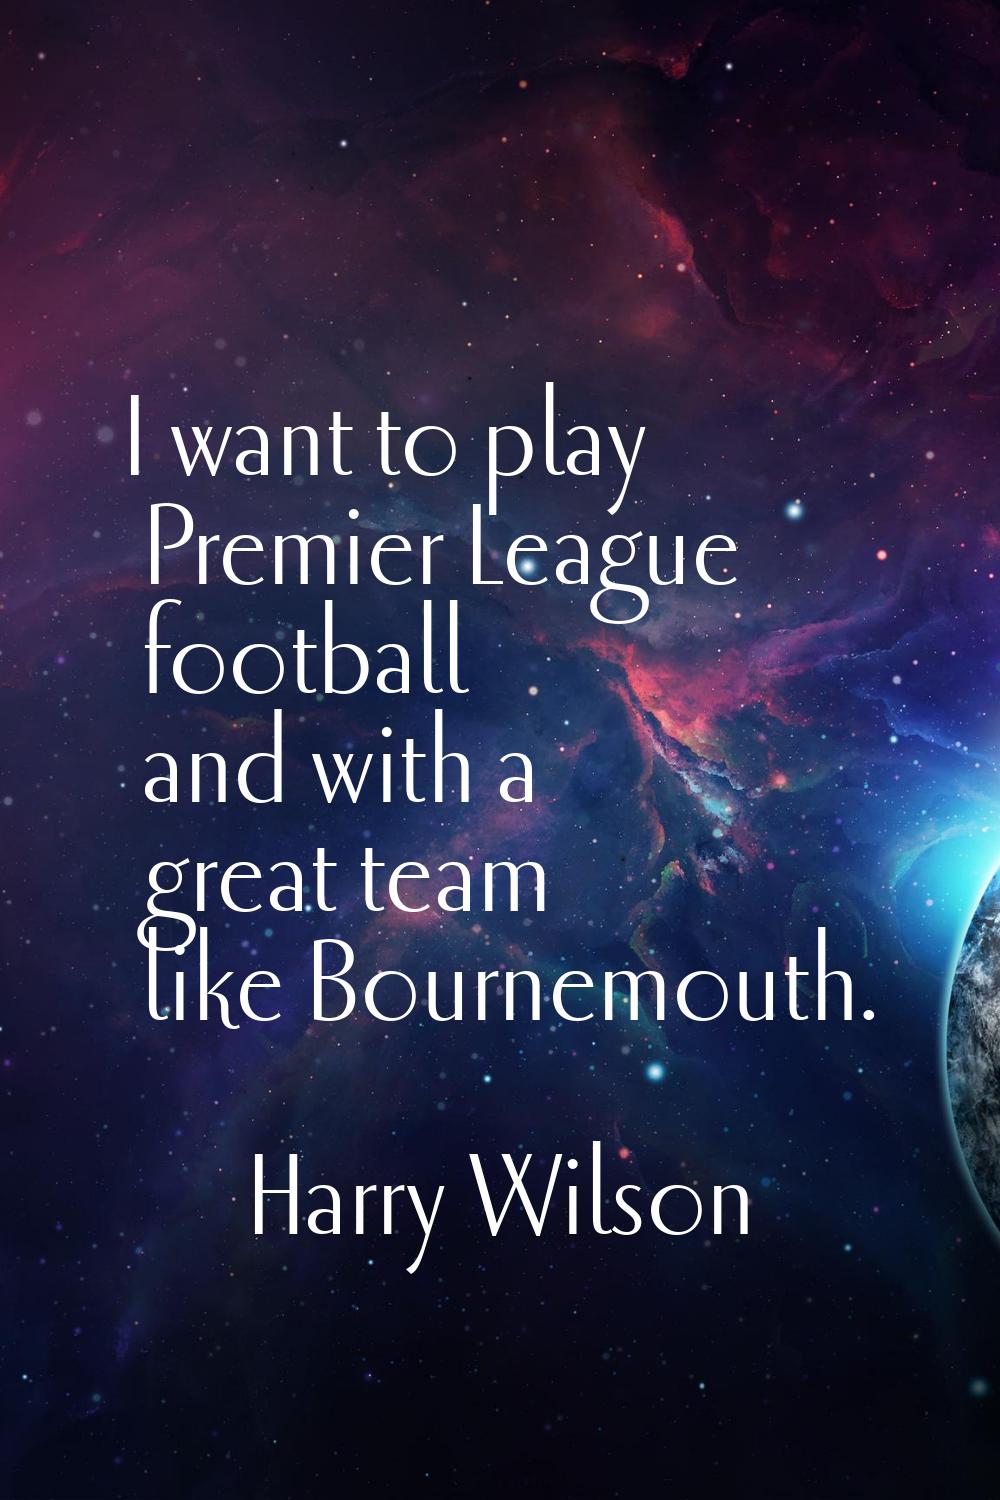 I want to play Premier League football and with a great team like Bournemouth.